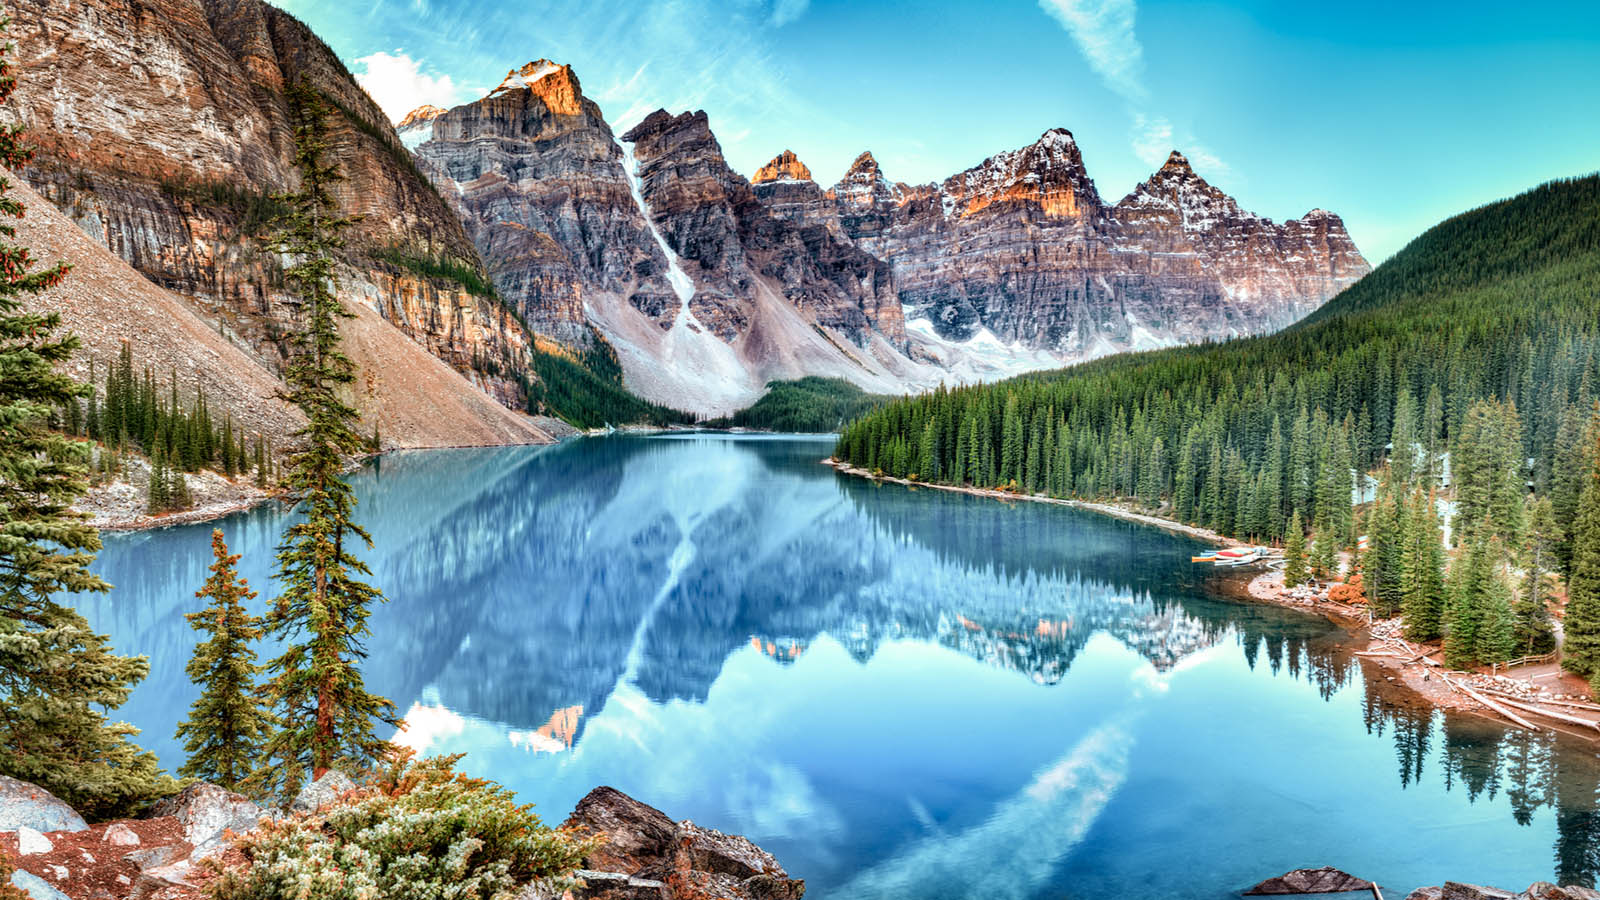 Can You Pass This 40-Question Geography Test That Gets Progressively Harder With Each Question? Moraine Lake, Banff National Park, Alberta, Canada